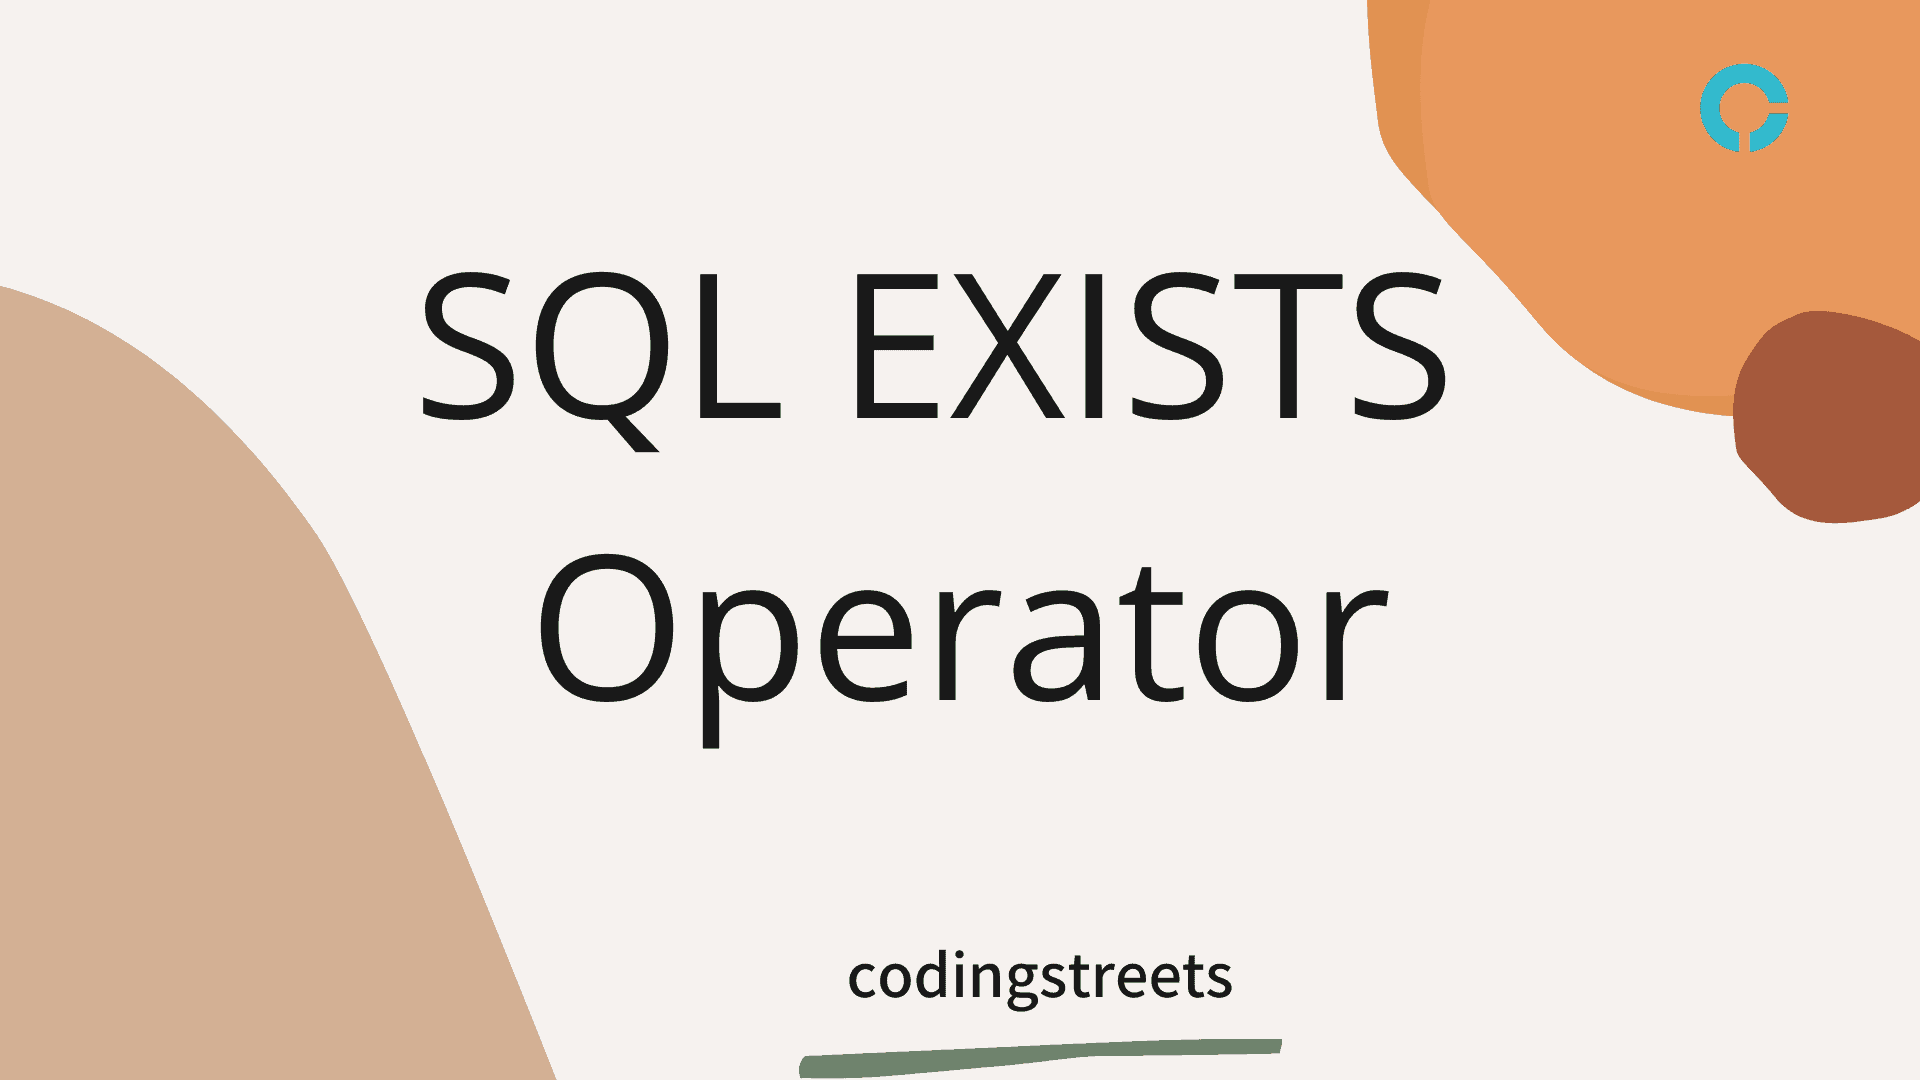 sql-exists-operator